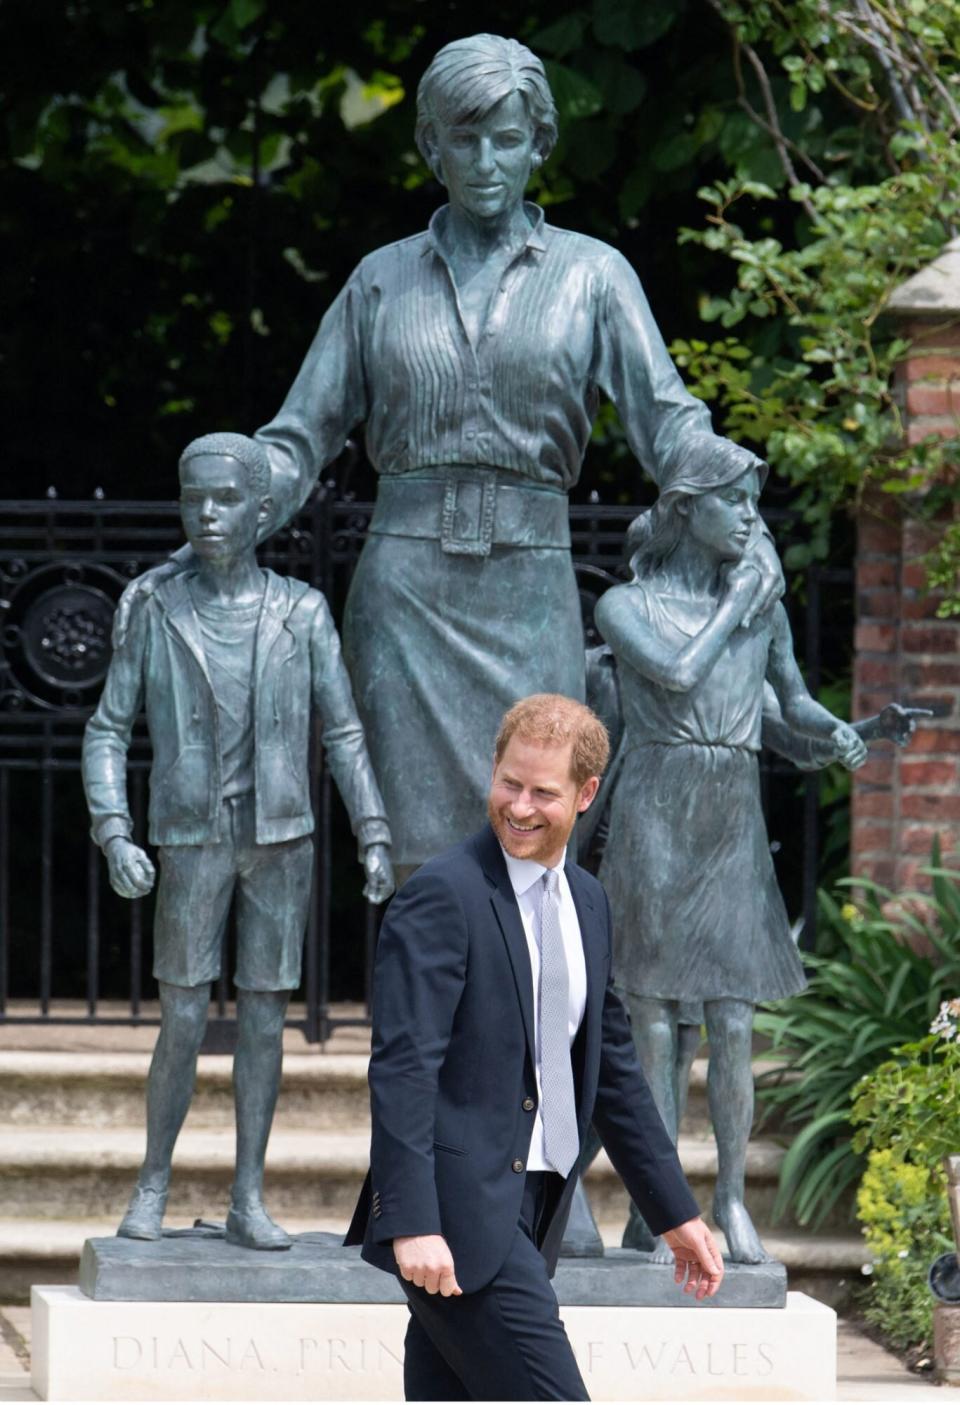 Prince Harry, Duke of Sussex gestures at the unveiling of a statue of his mother, Princess Diana